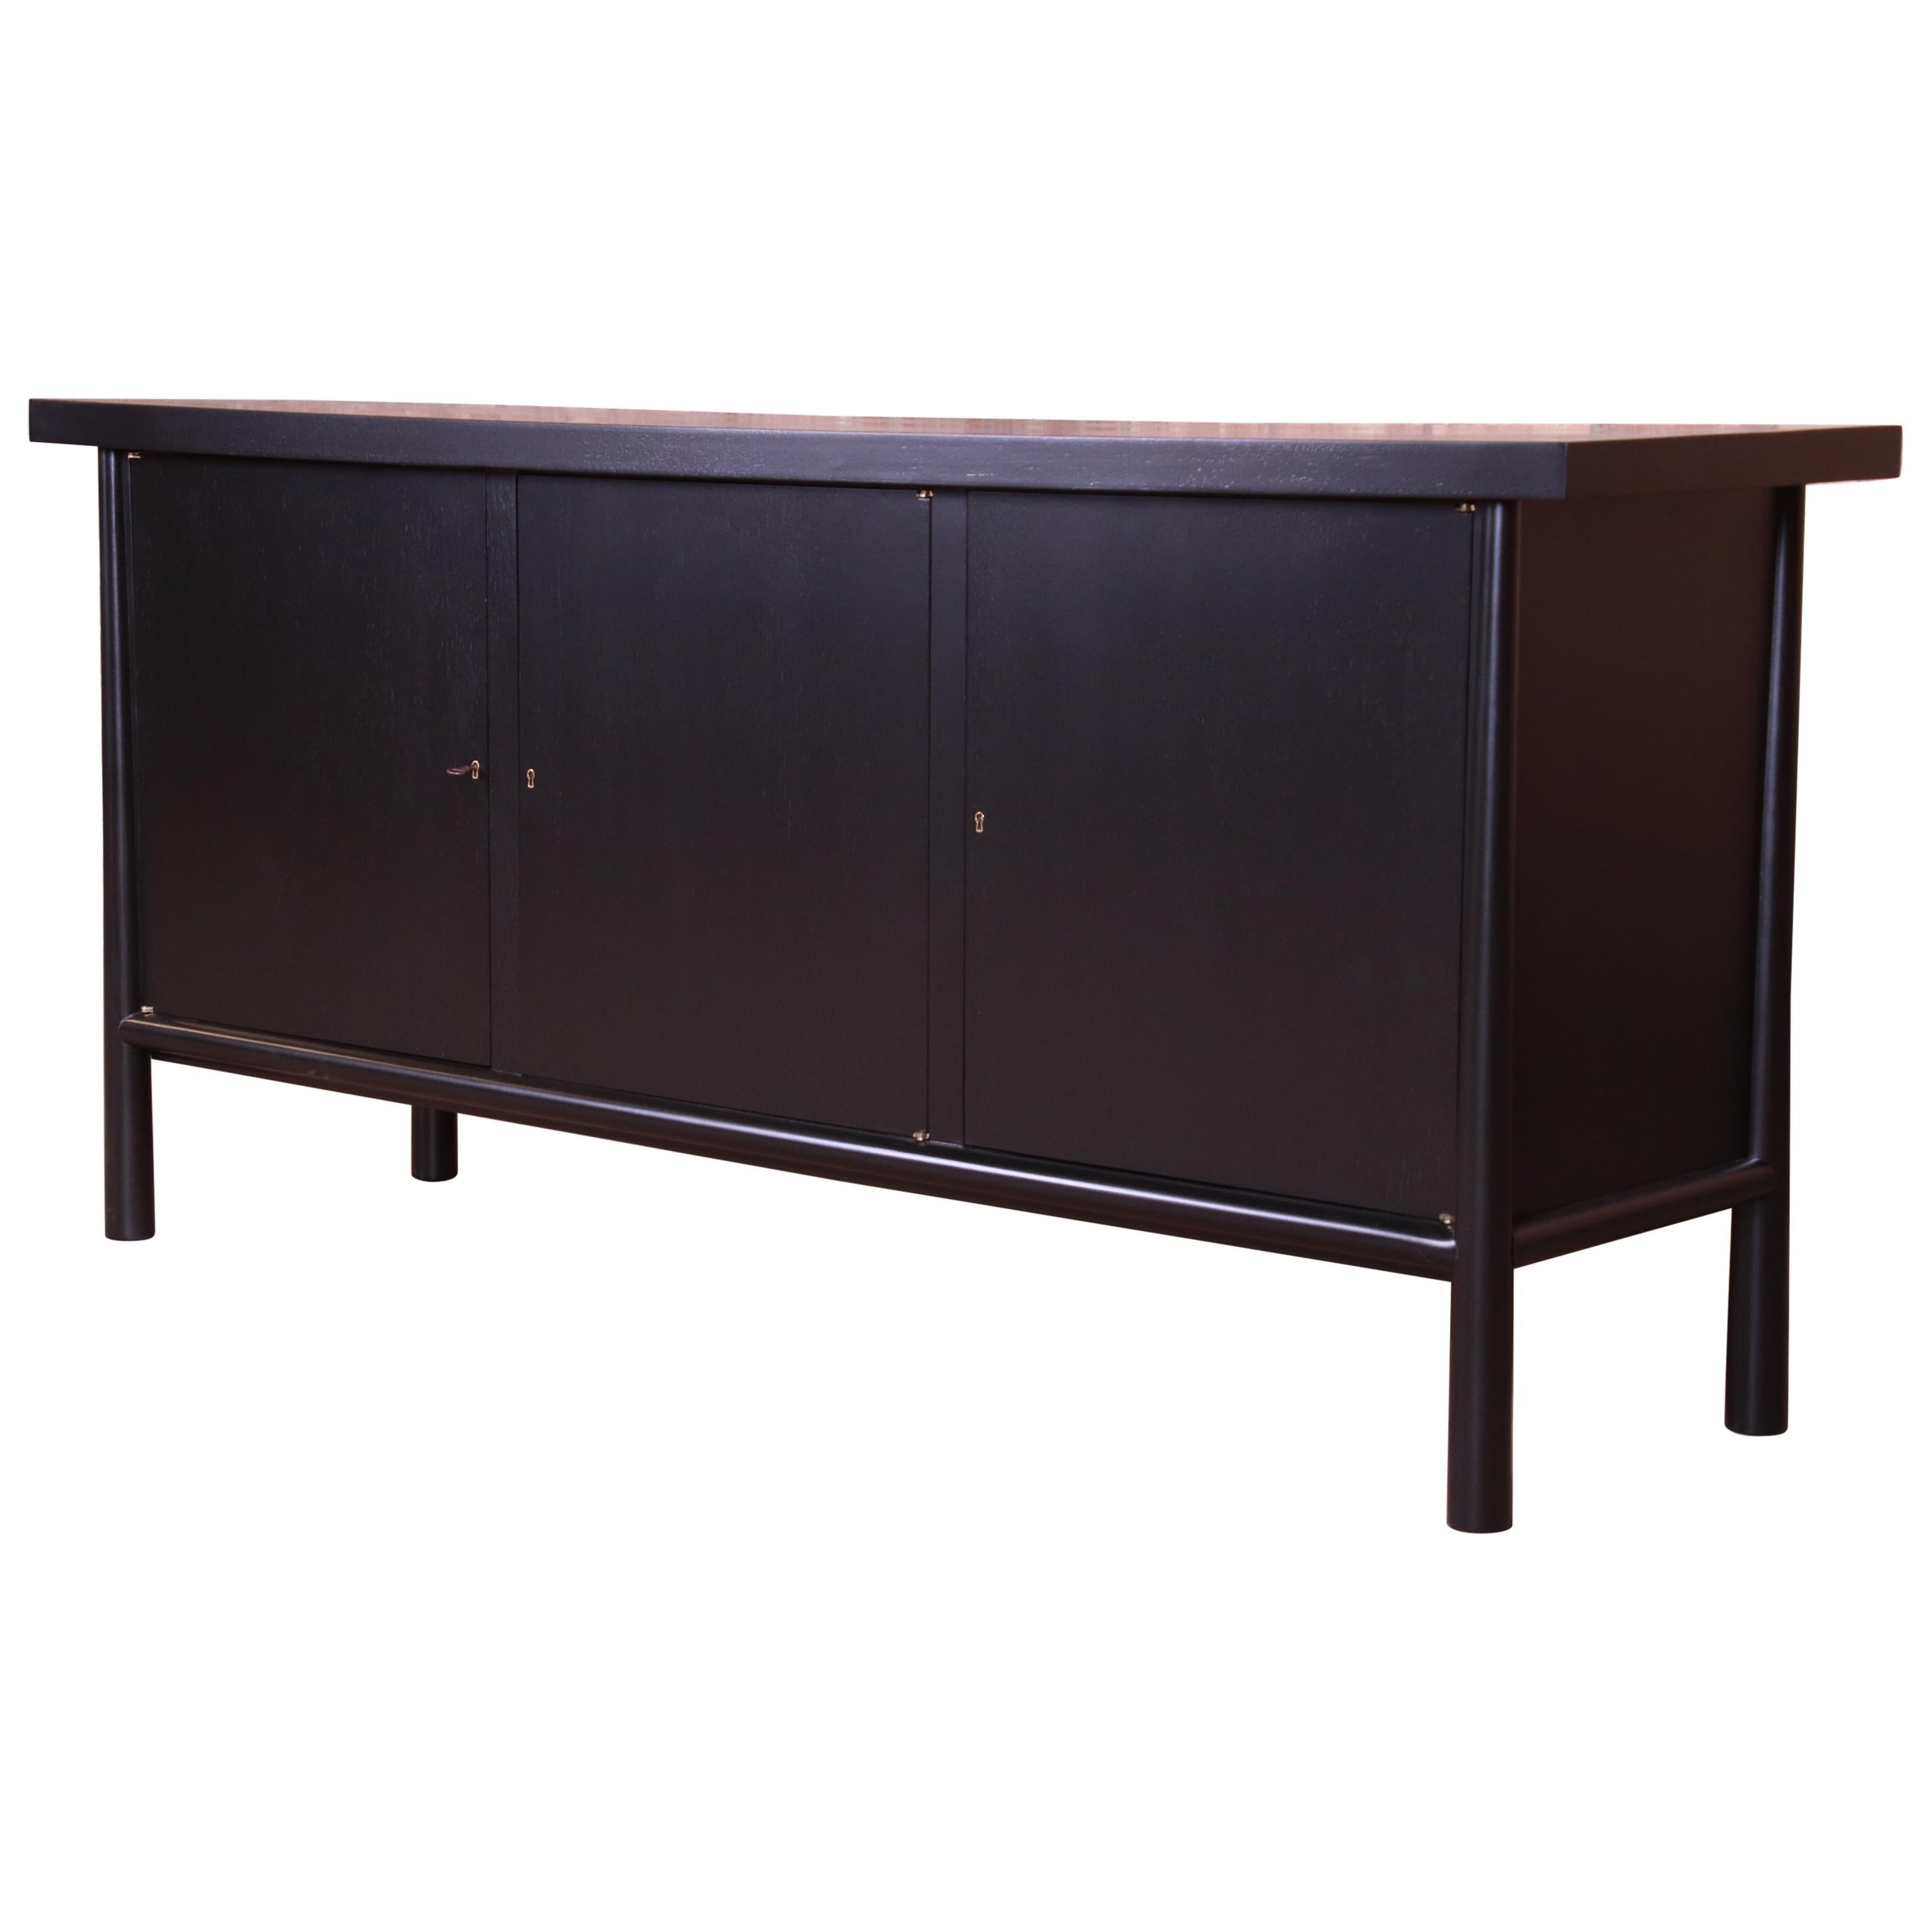 T.H. Robsjohn-Gibbings for Widdicomb Black Lacquered Sideboard, Newly Refinished